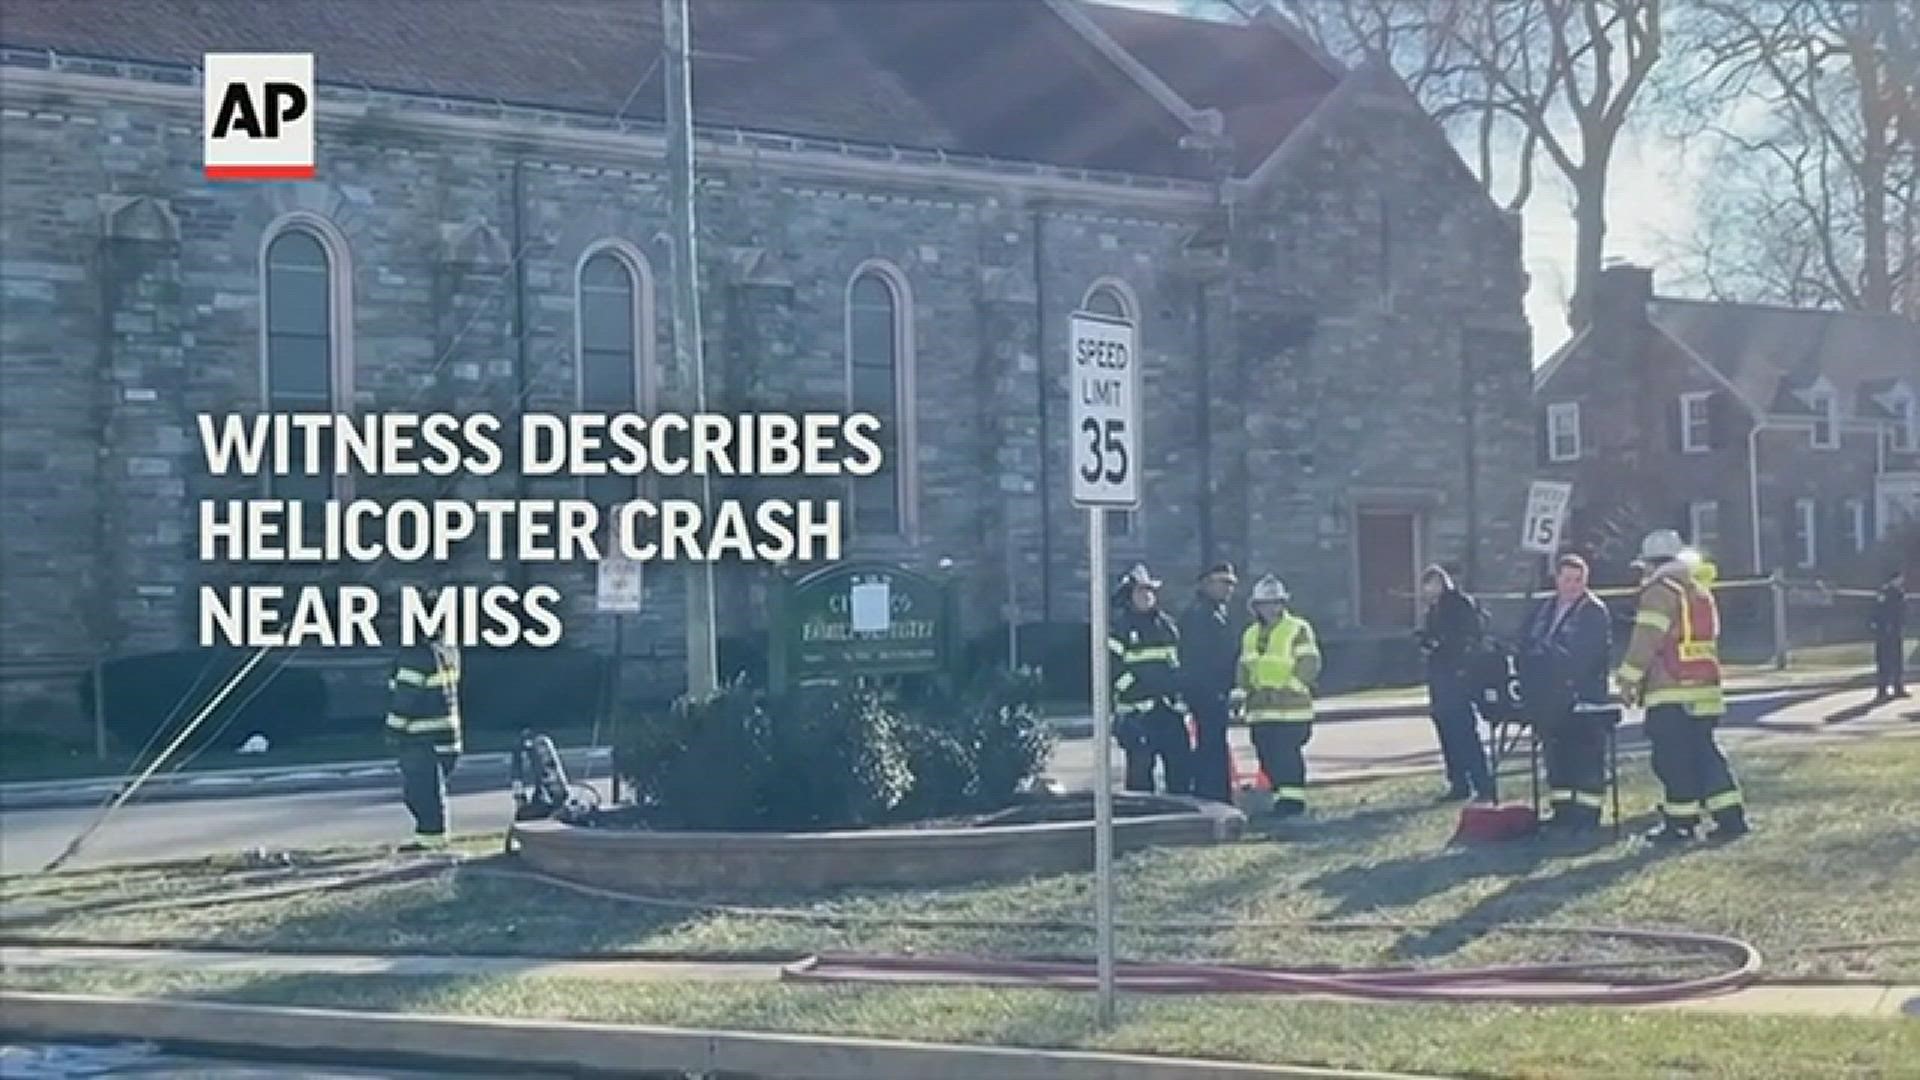 A witness described the moments before and after a medical helicopter crashed Tuesday in a residential area of suburban Philadelphia.